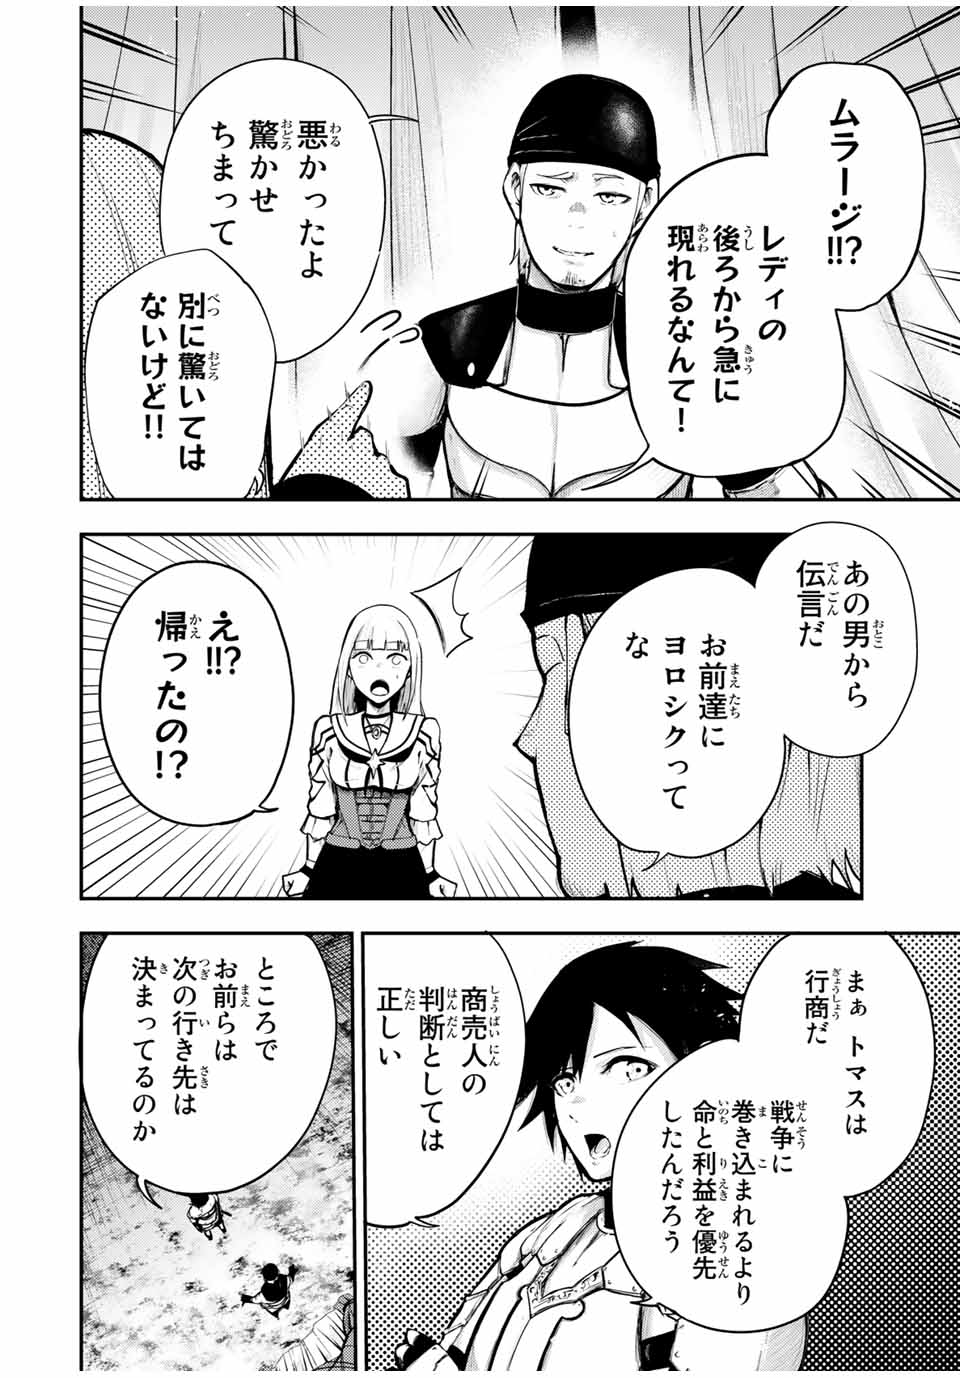 the strongest former prince-; 奴隷転生 ～その奴隷、最強の元王子につき～ 第32話 - Page 6